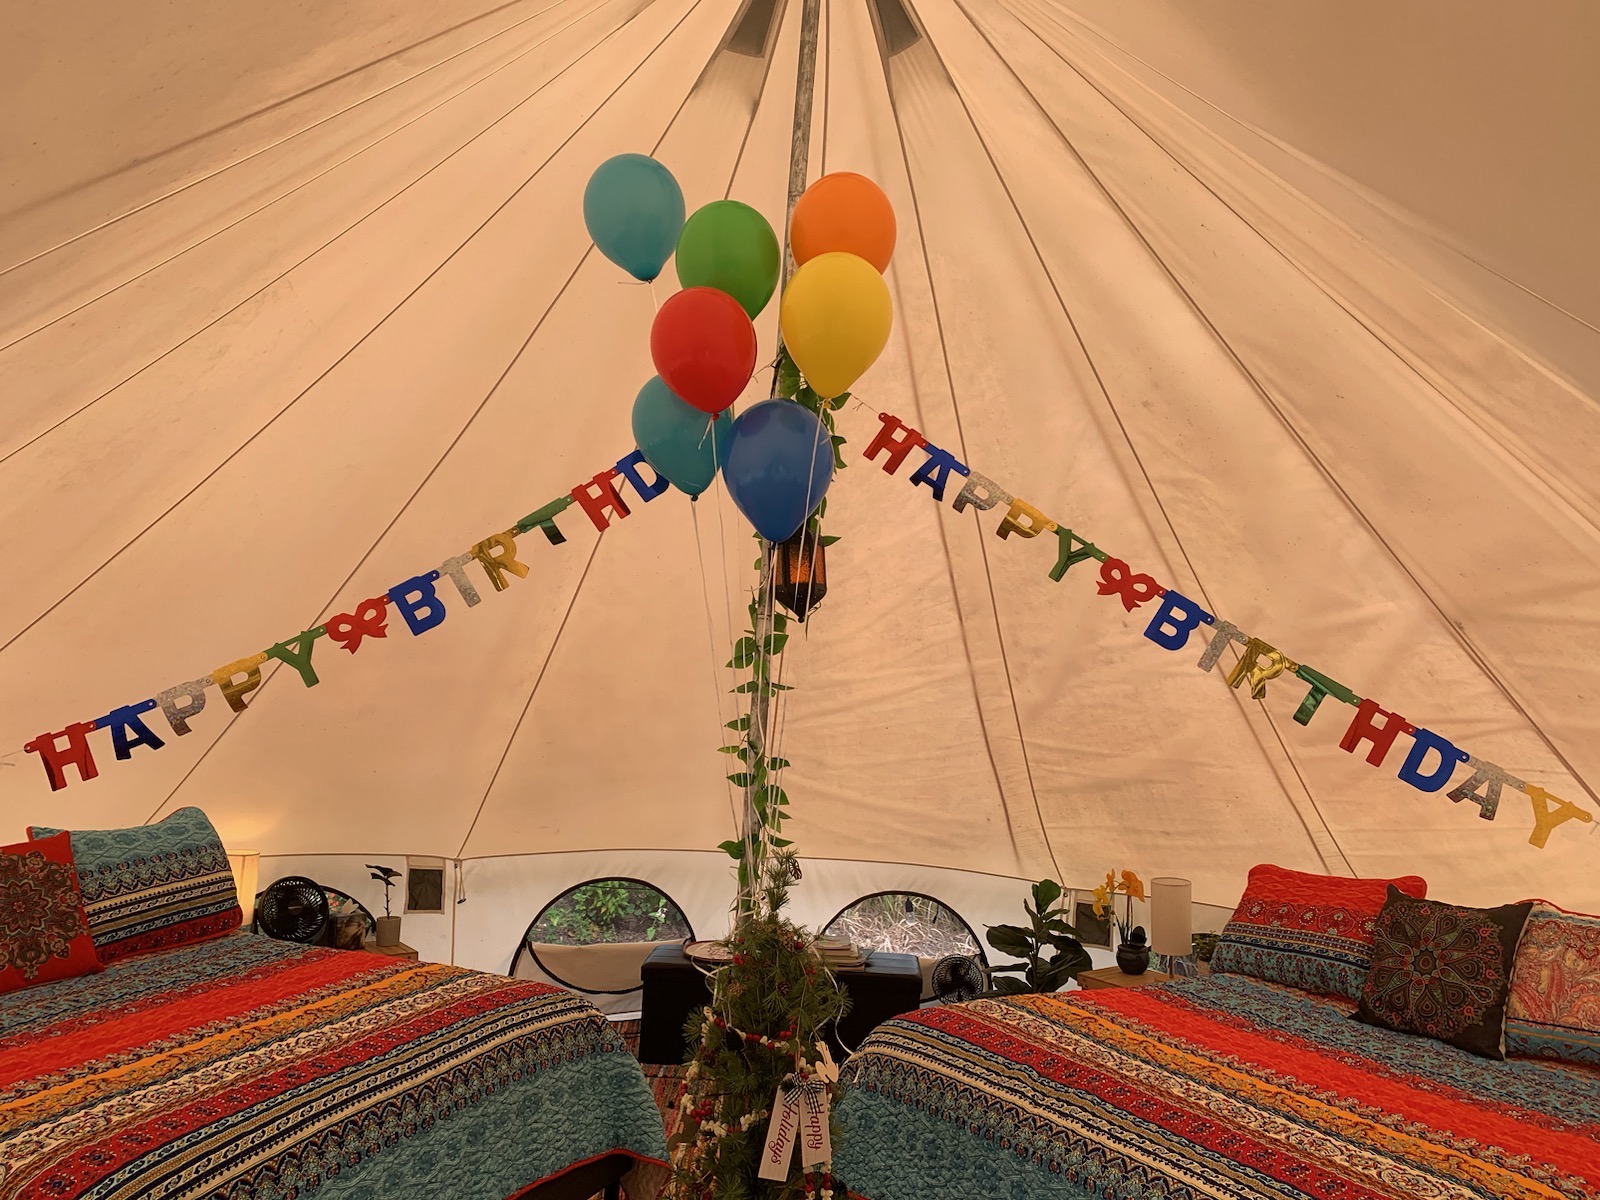 A happy birthday banner and balloons decorate the glamping tent.